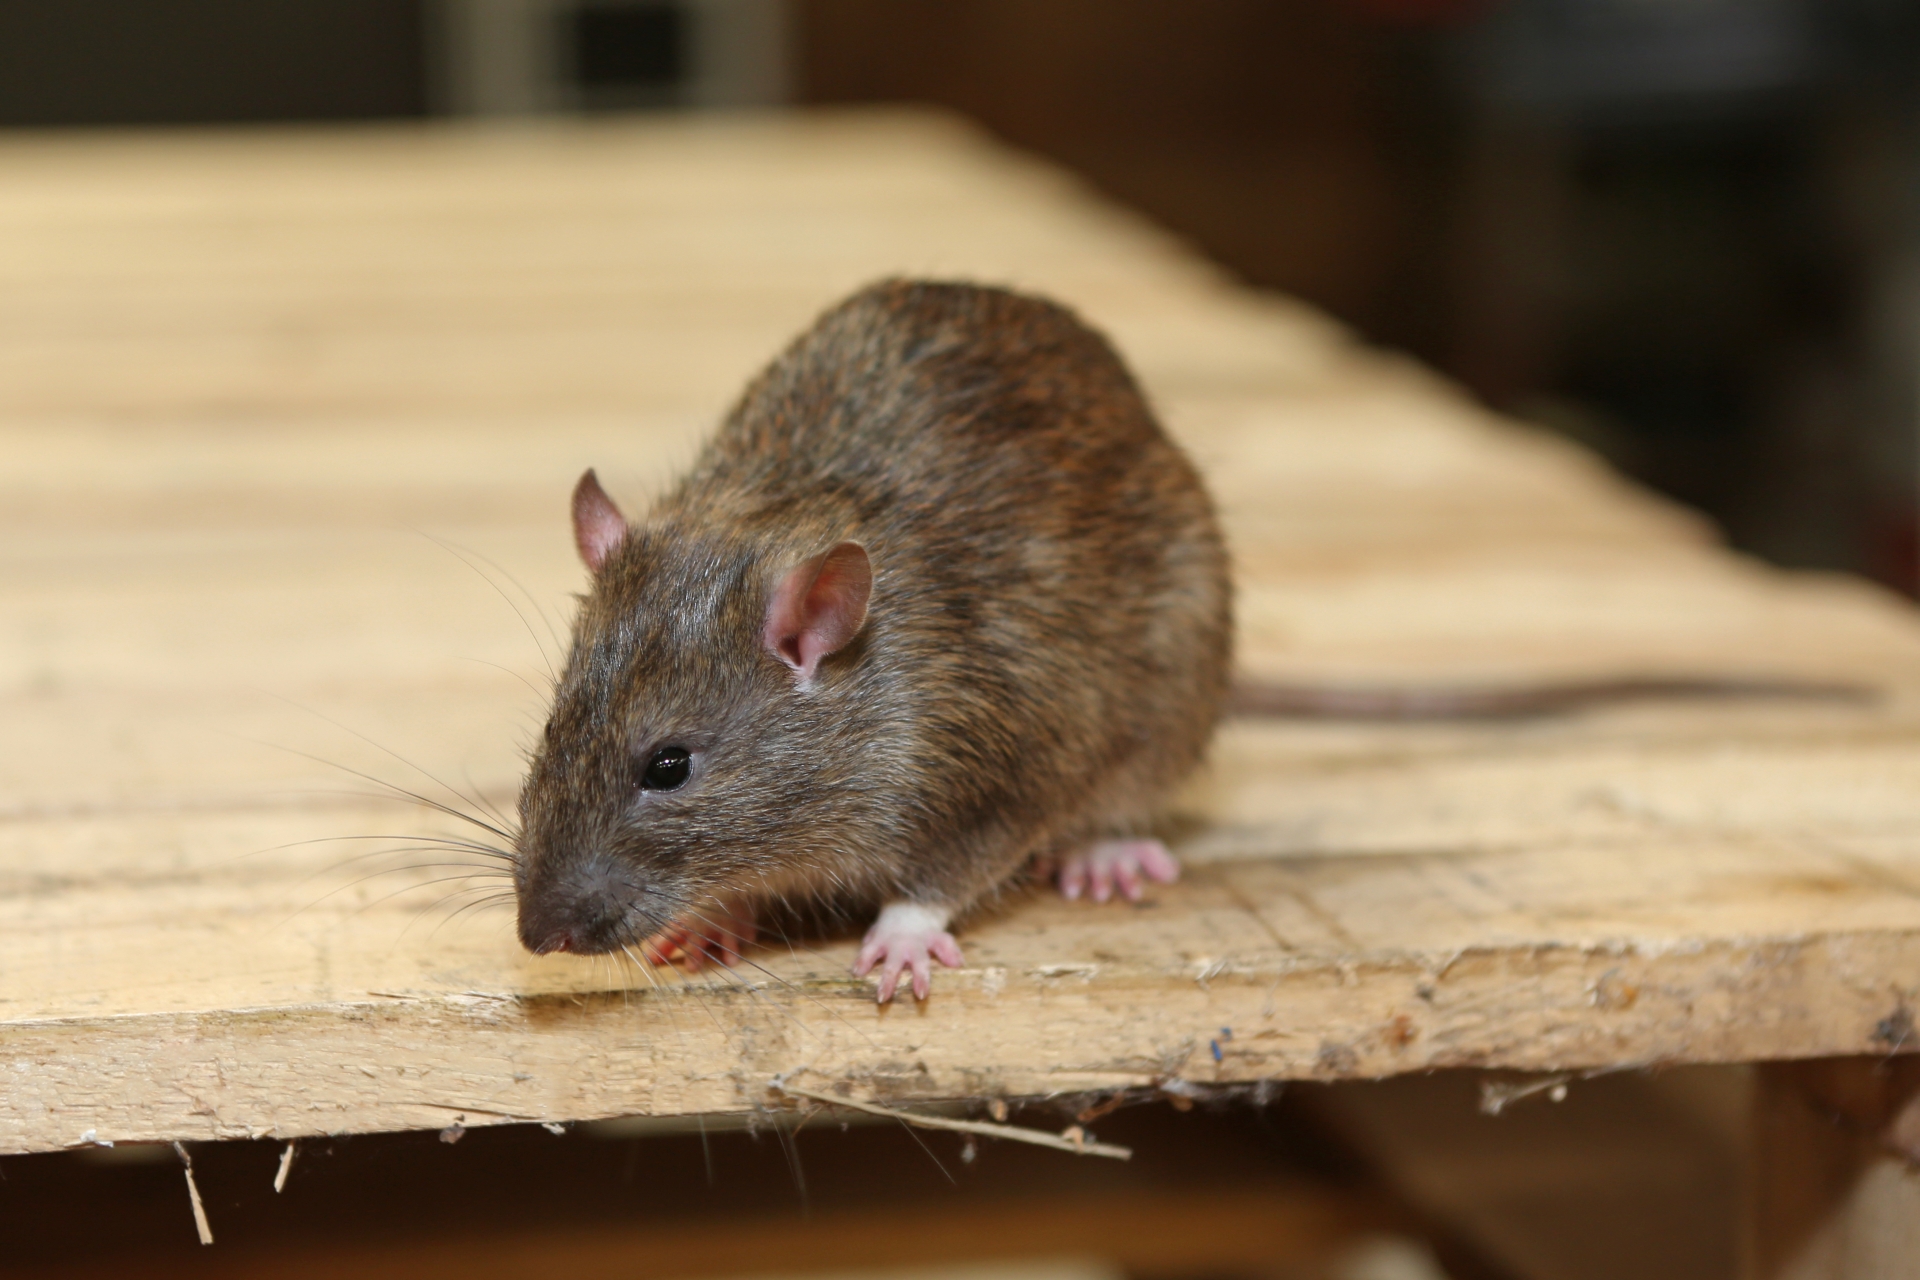 Rat extermination, Pest Control in Notting Hill, W11. Call Now 020 8166 9746